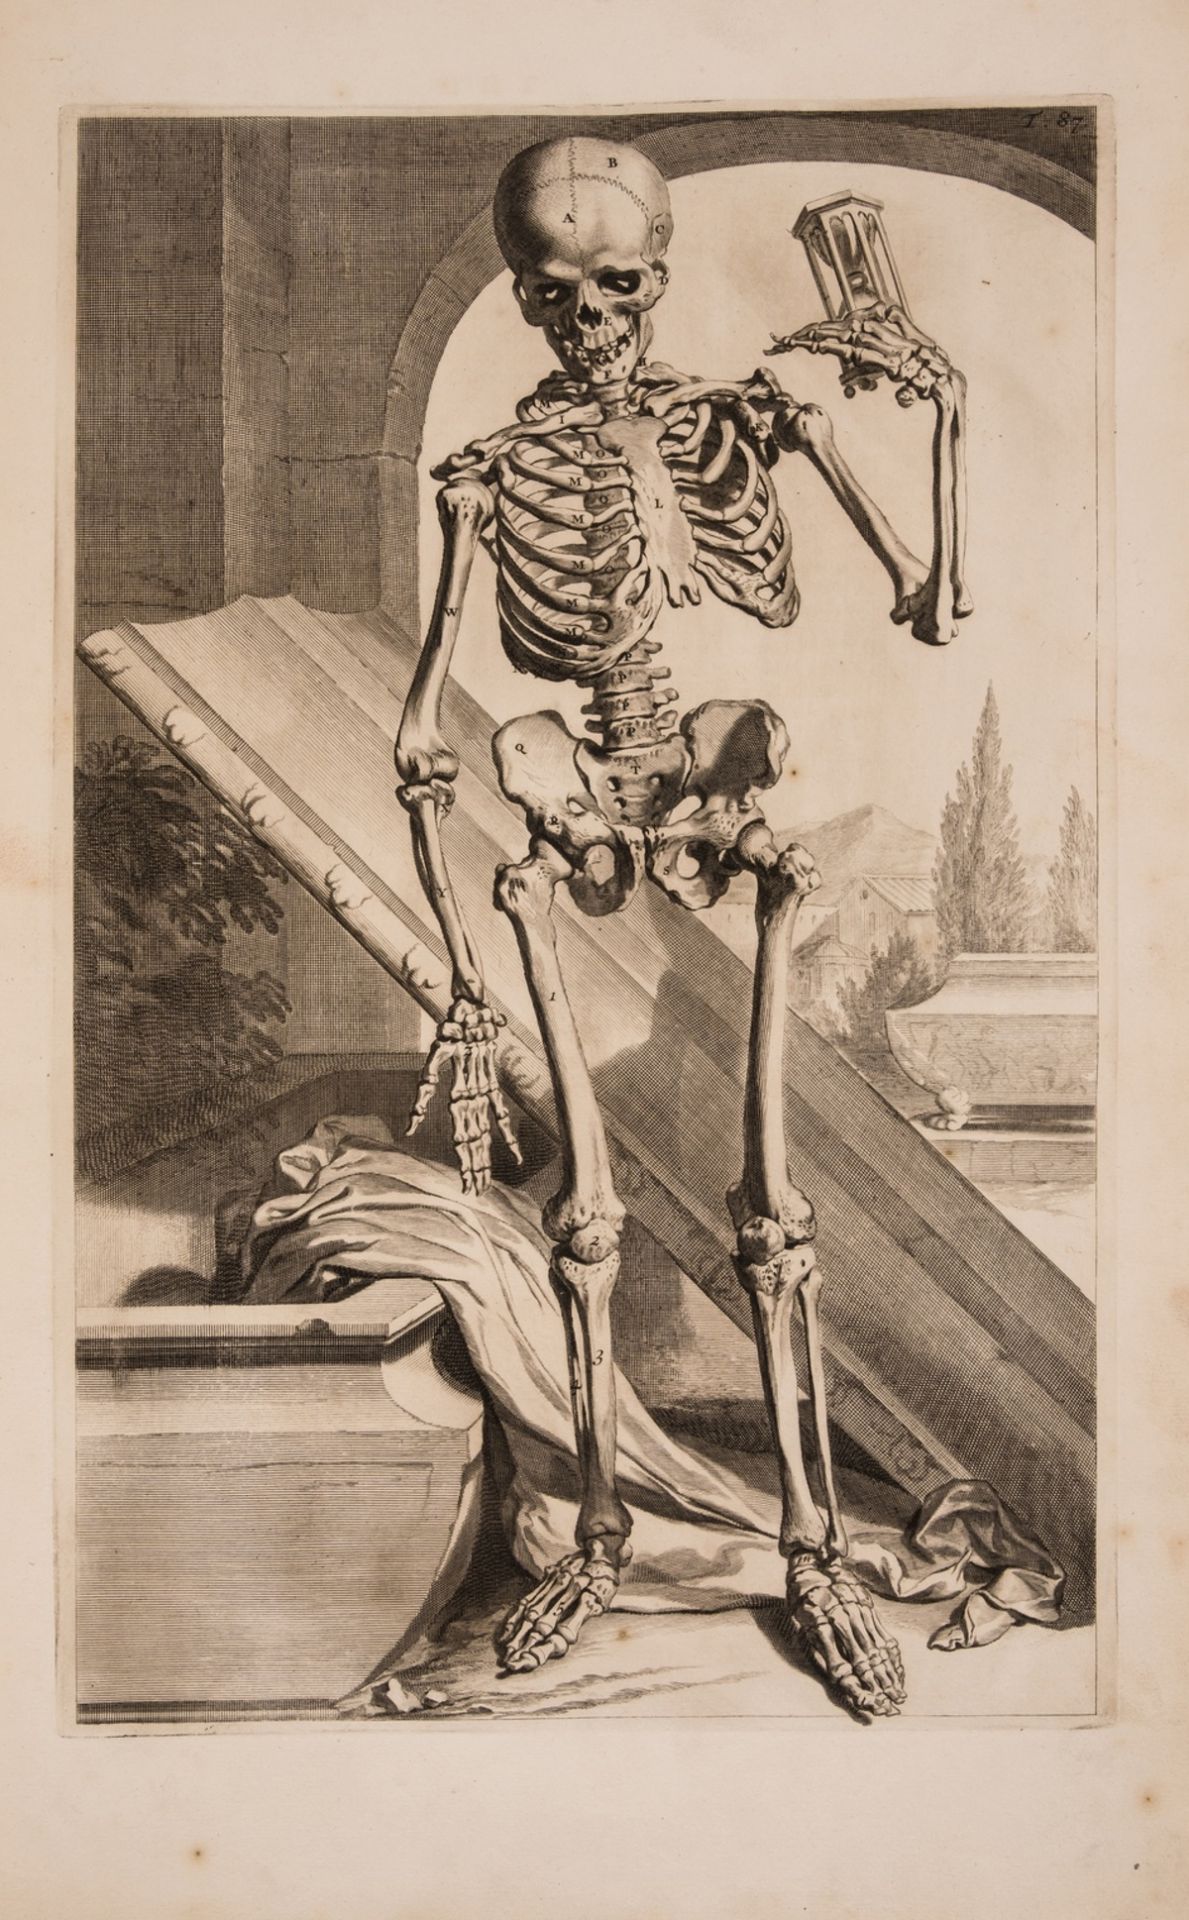 Anatomy.- Cowper (William) The Anatomy of Humane Bodies, first edition, 111/114 engraved plates, …